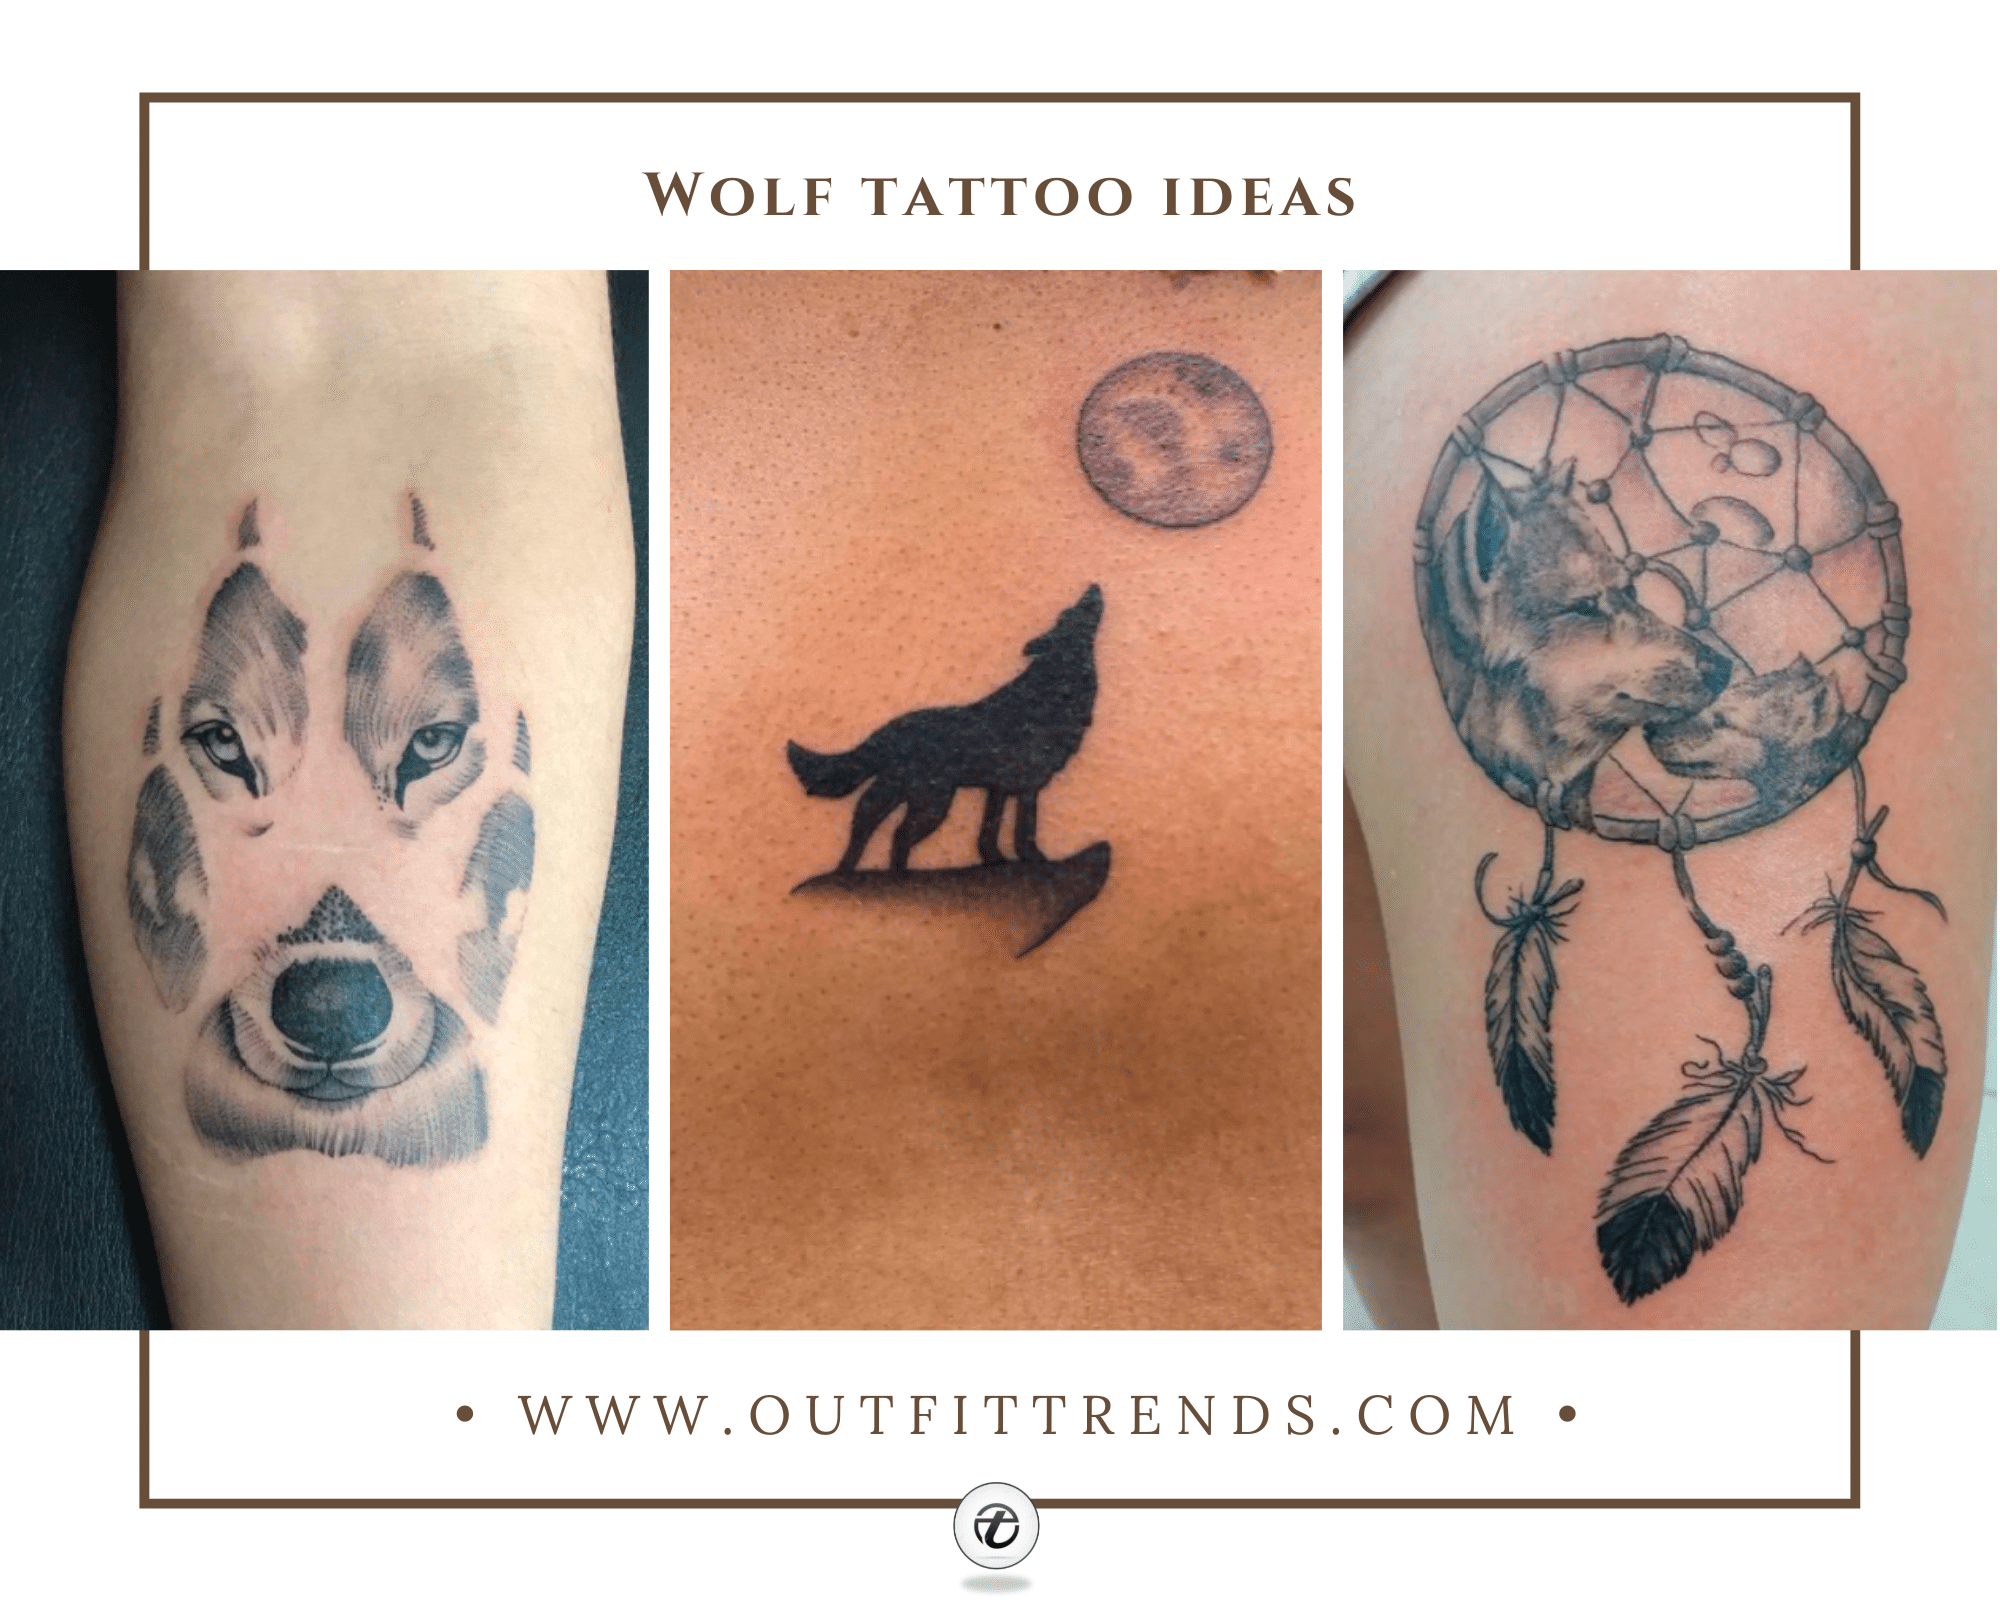 Mens Wolf Tattoos  Photos of Works By Pro Tattoo Artists  Mens Wolf  Tattoos